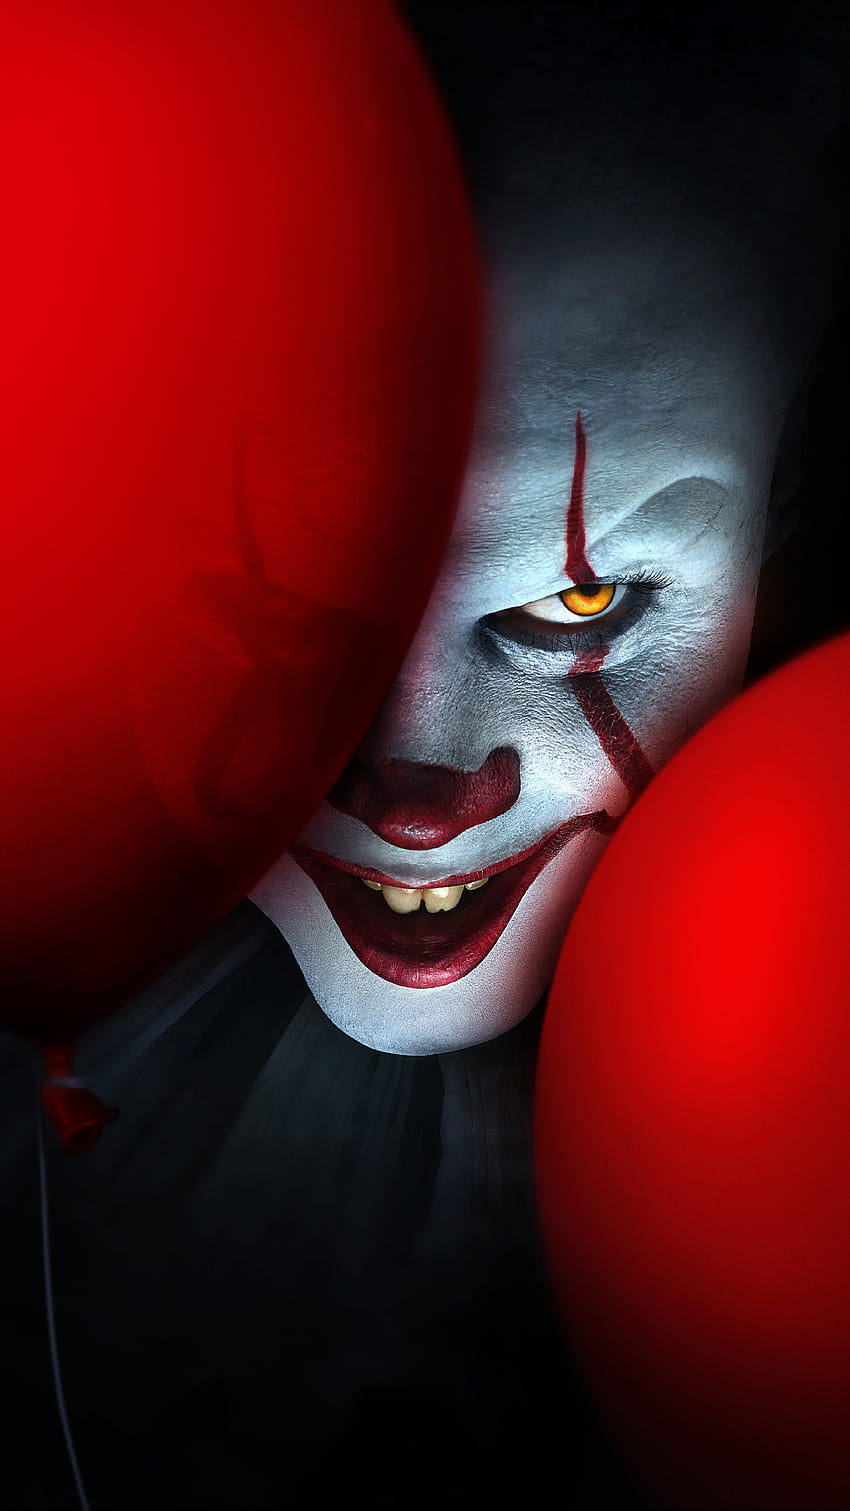 Pennywise the clown from it 2017 movie wallpaper for mobiles - Clown